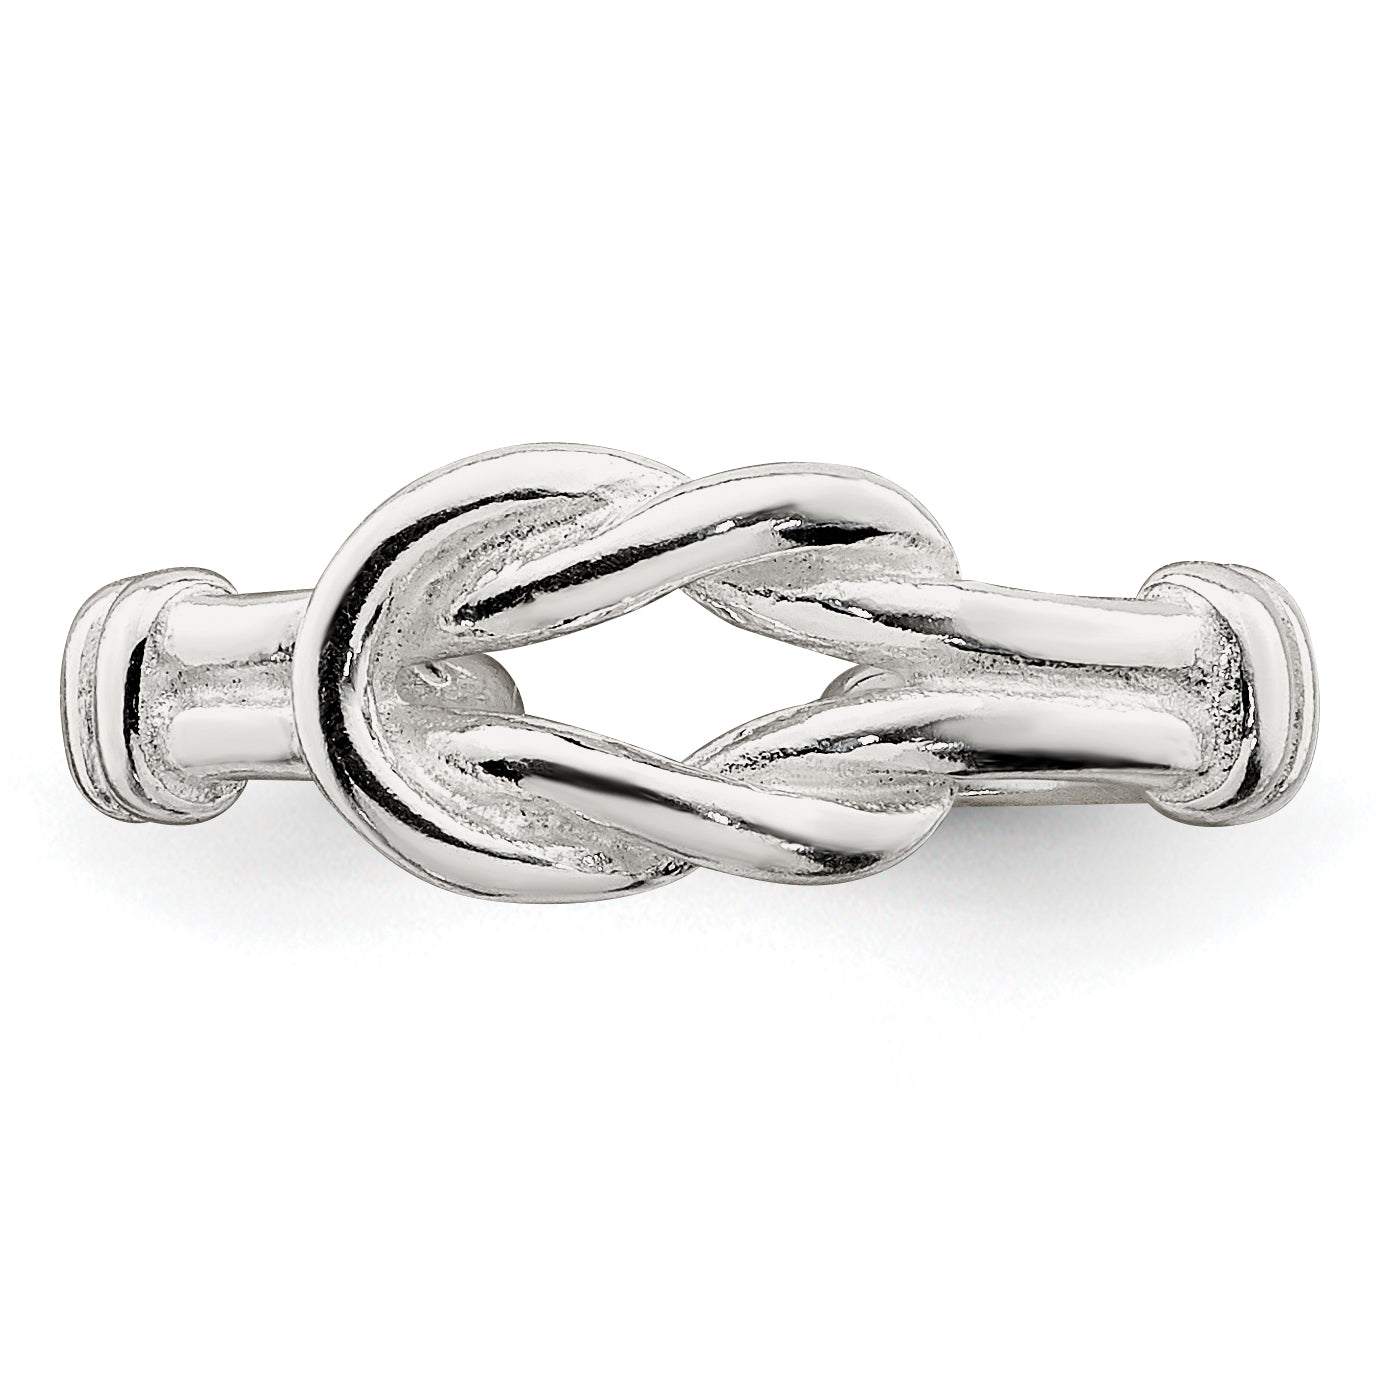 Sterling Silver Love Knot Toe Ring